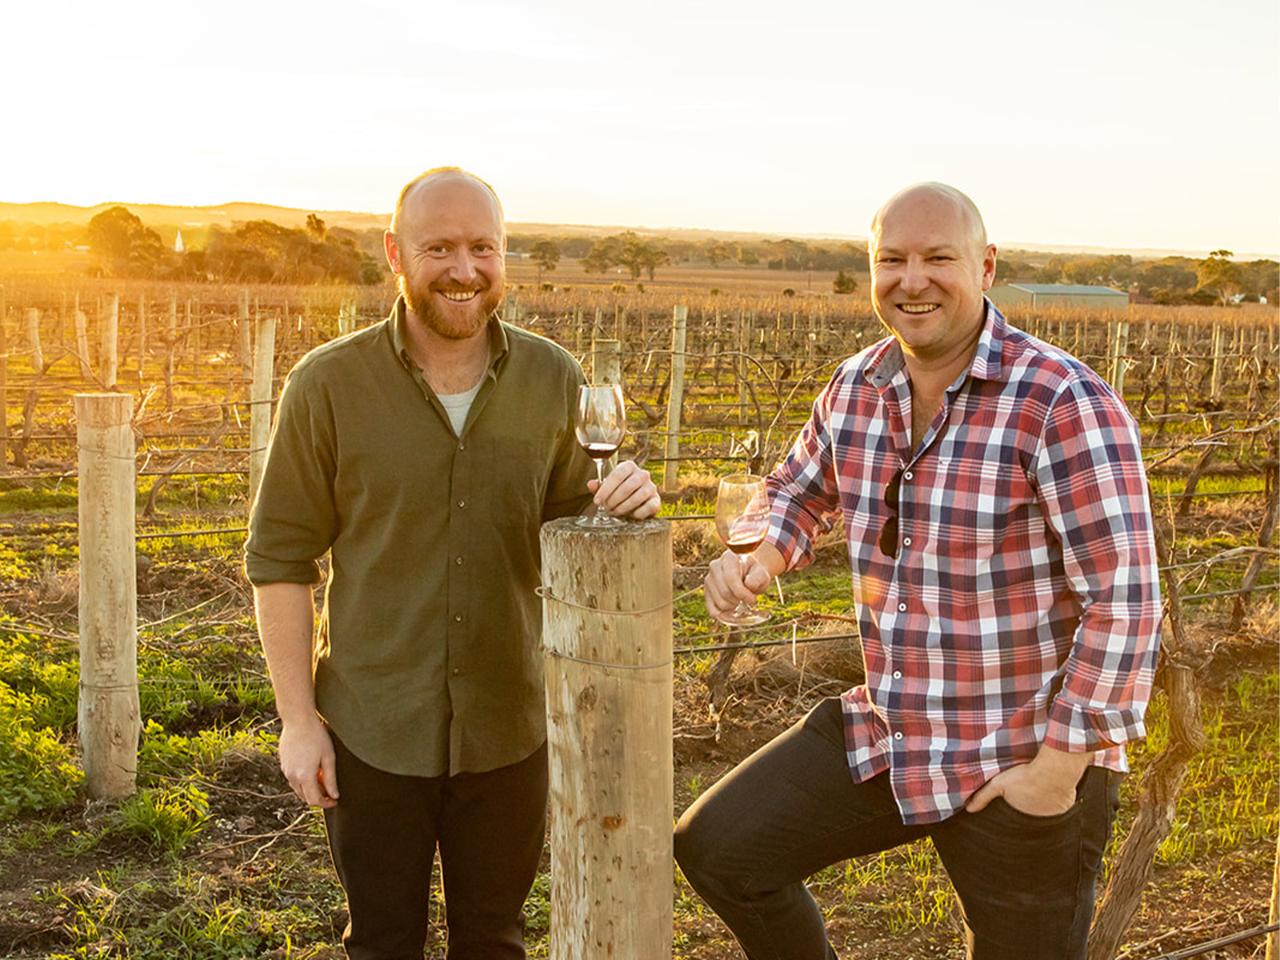 "A New Take on Barossa" led by Daniel Hartwig and James Lienert